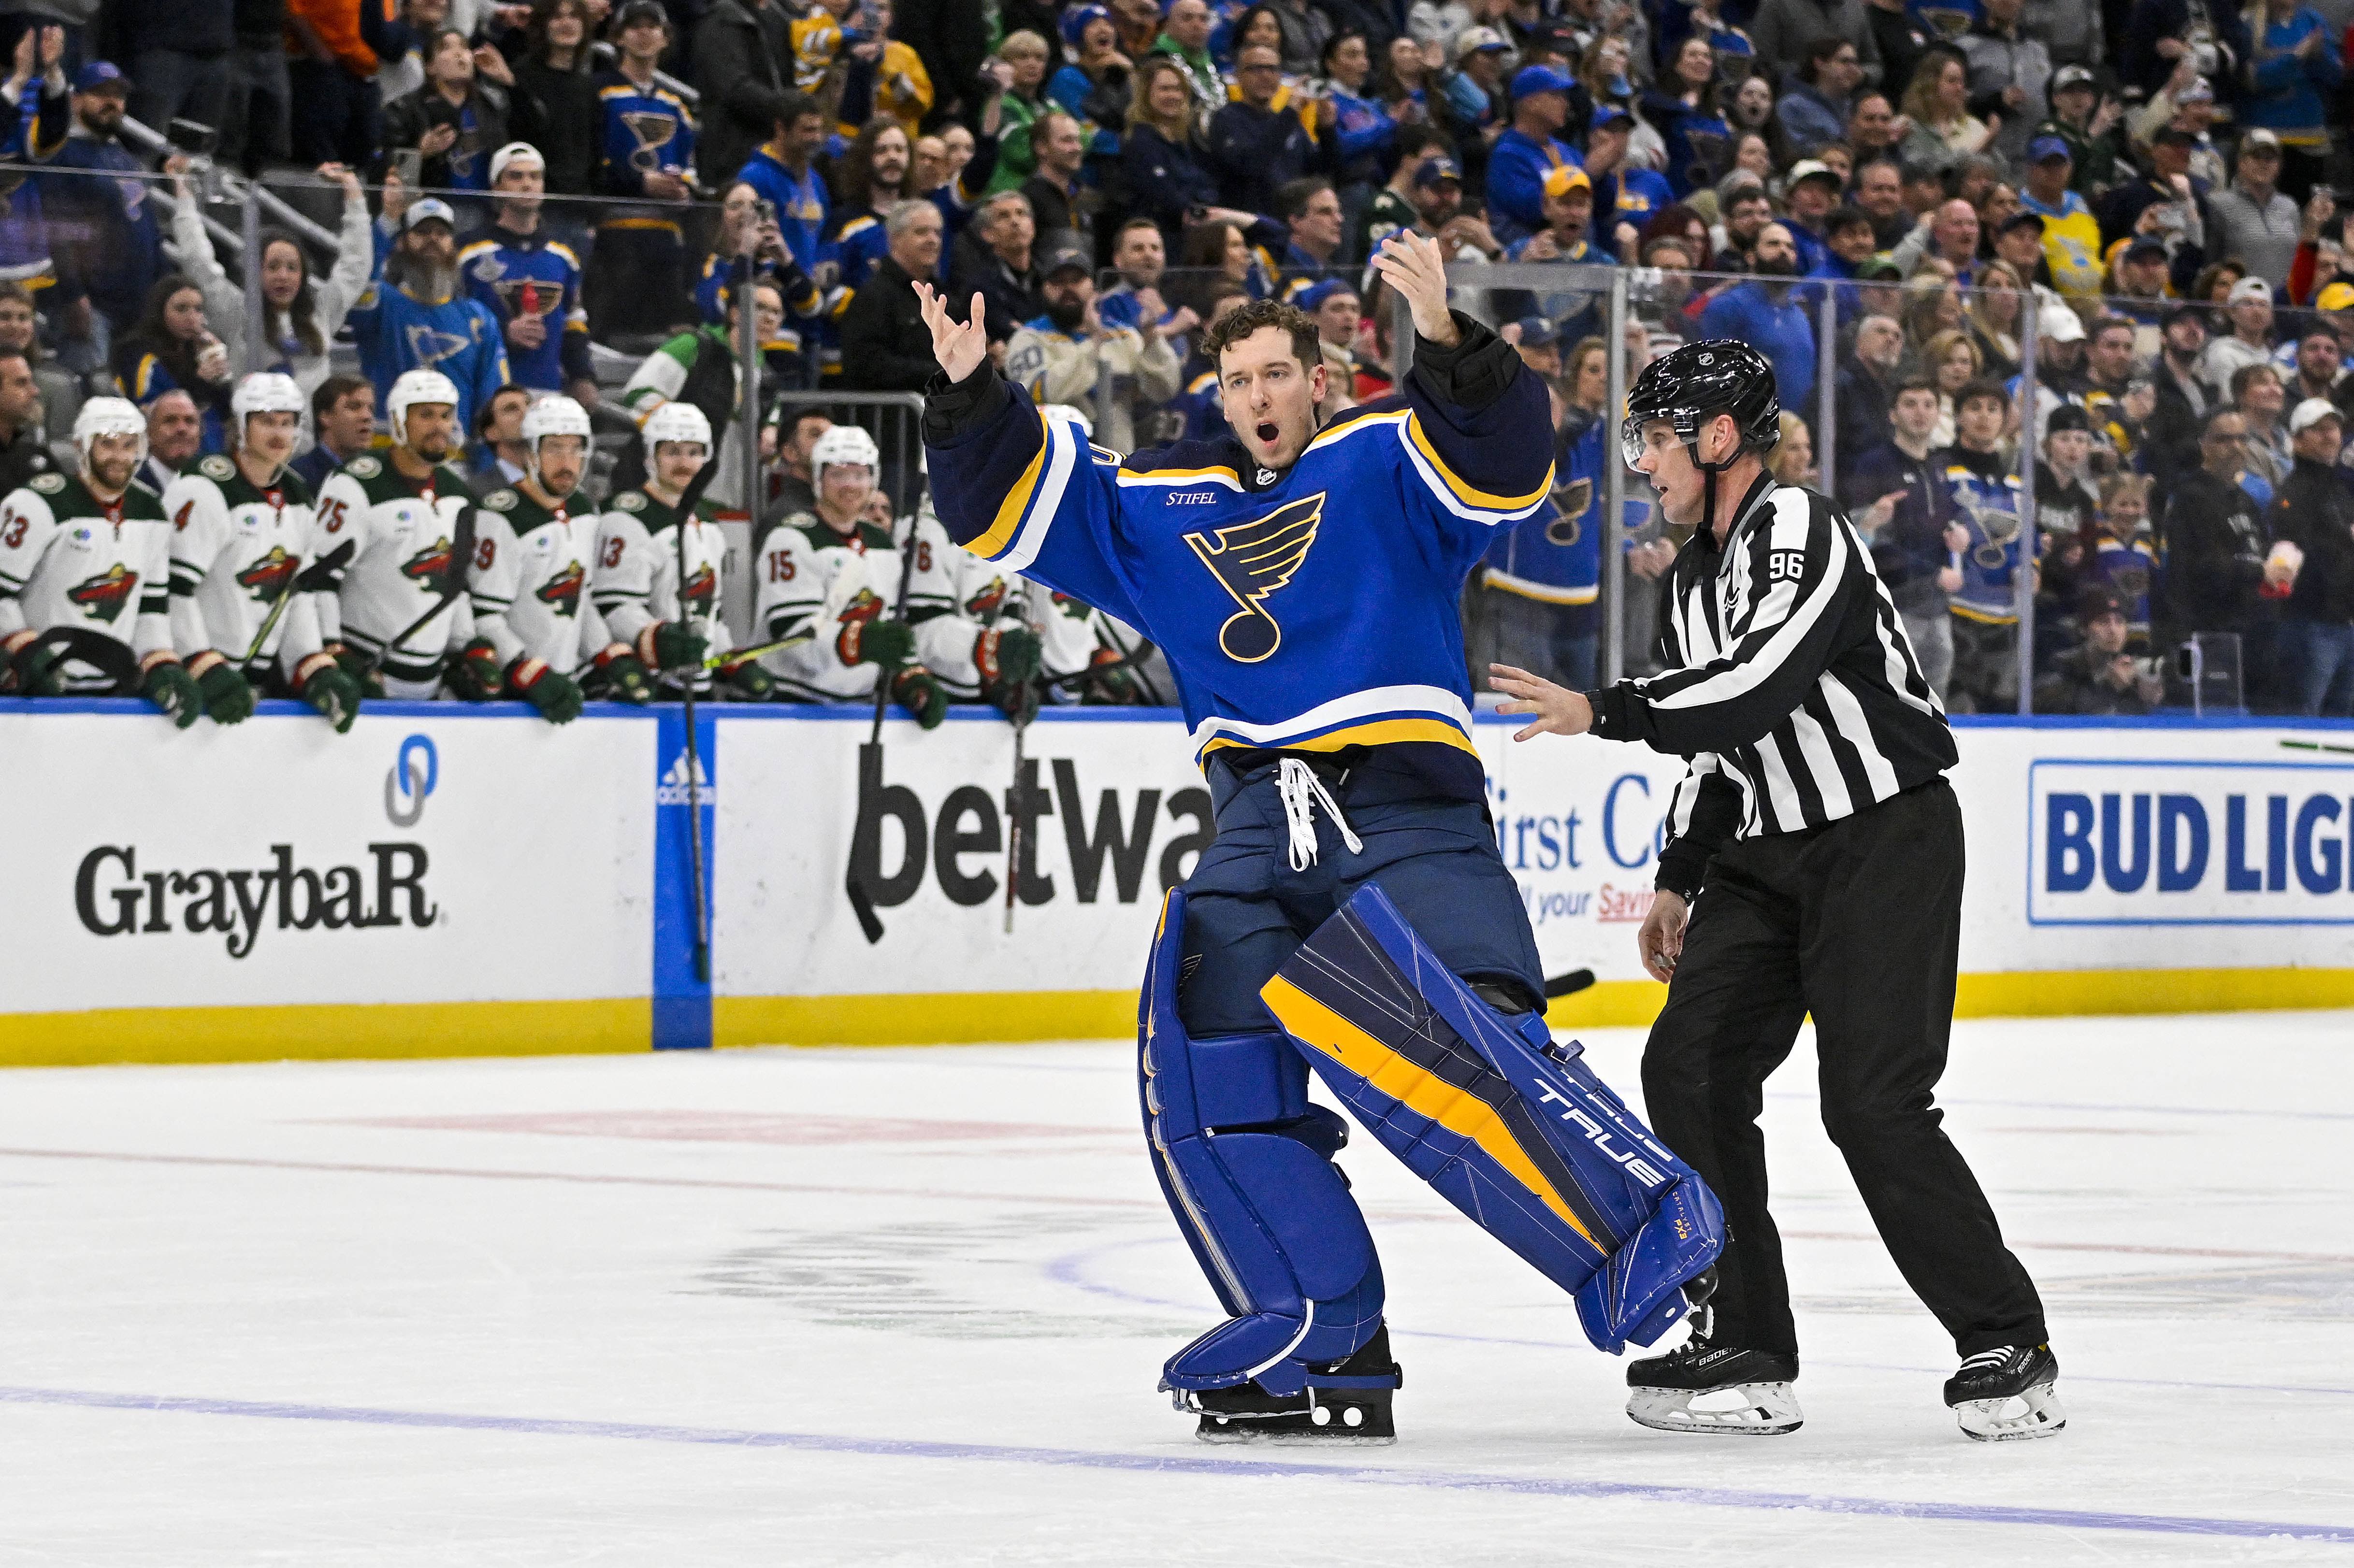 Jordan Binnington suspended two games for roughing and unsportsmanlike conduct